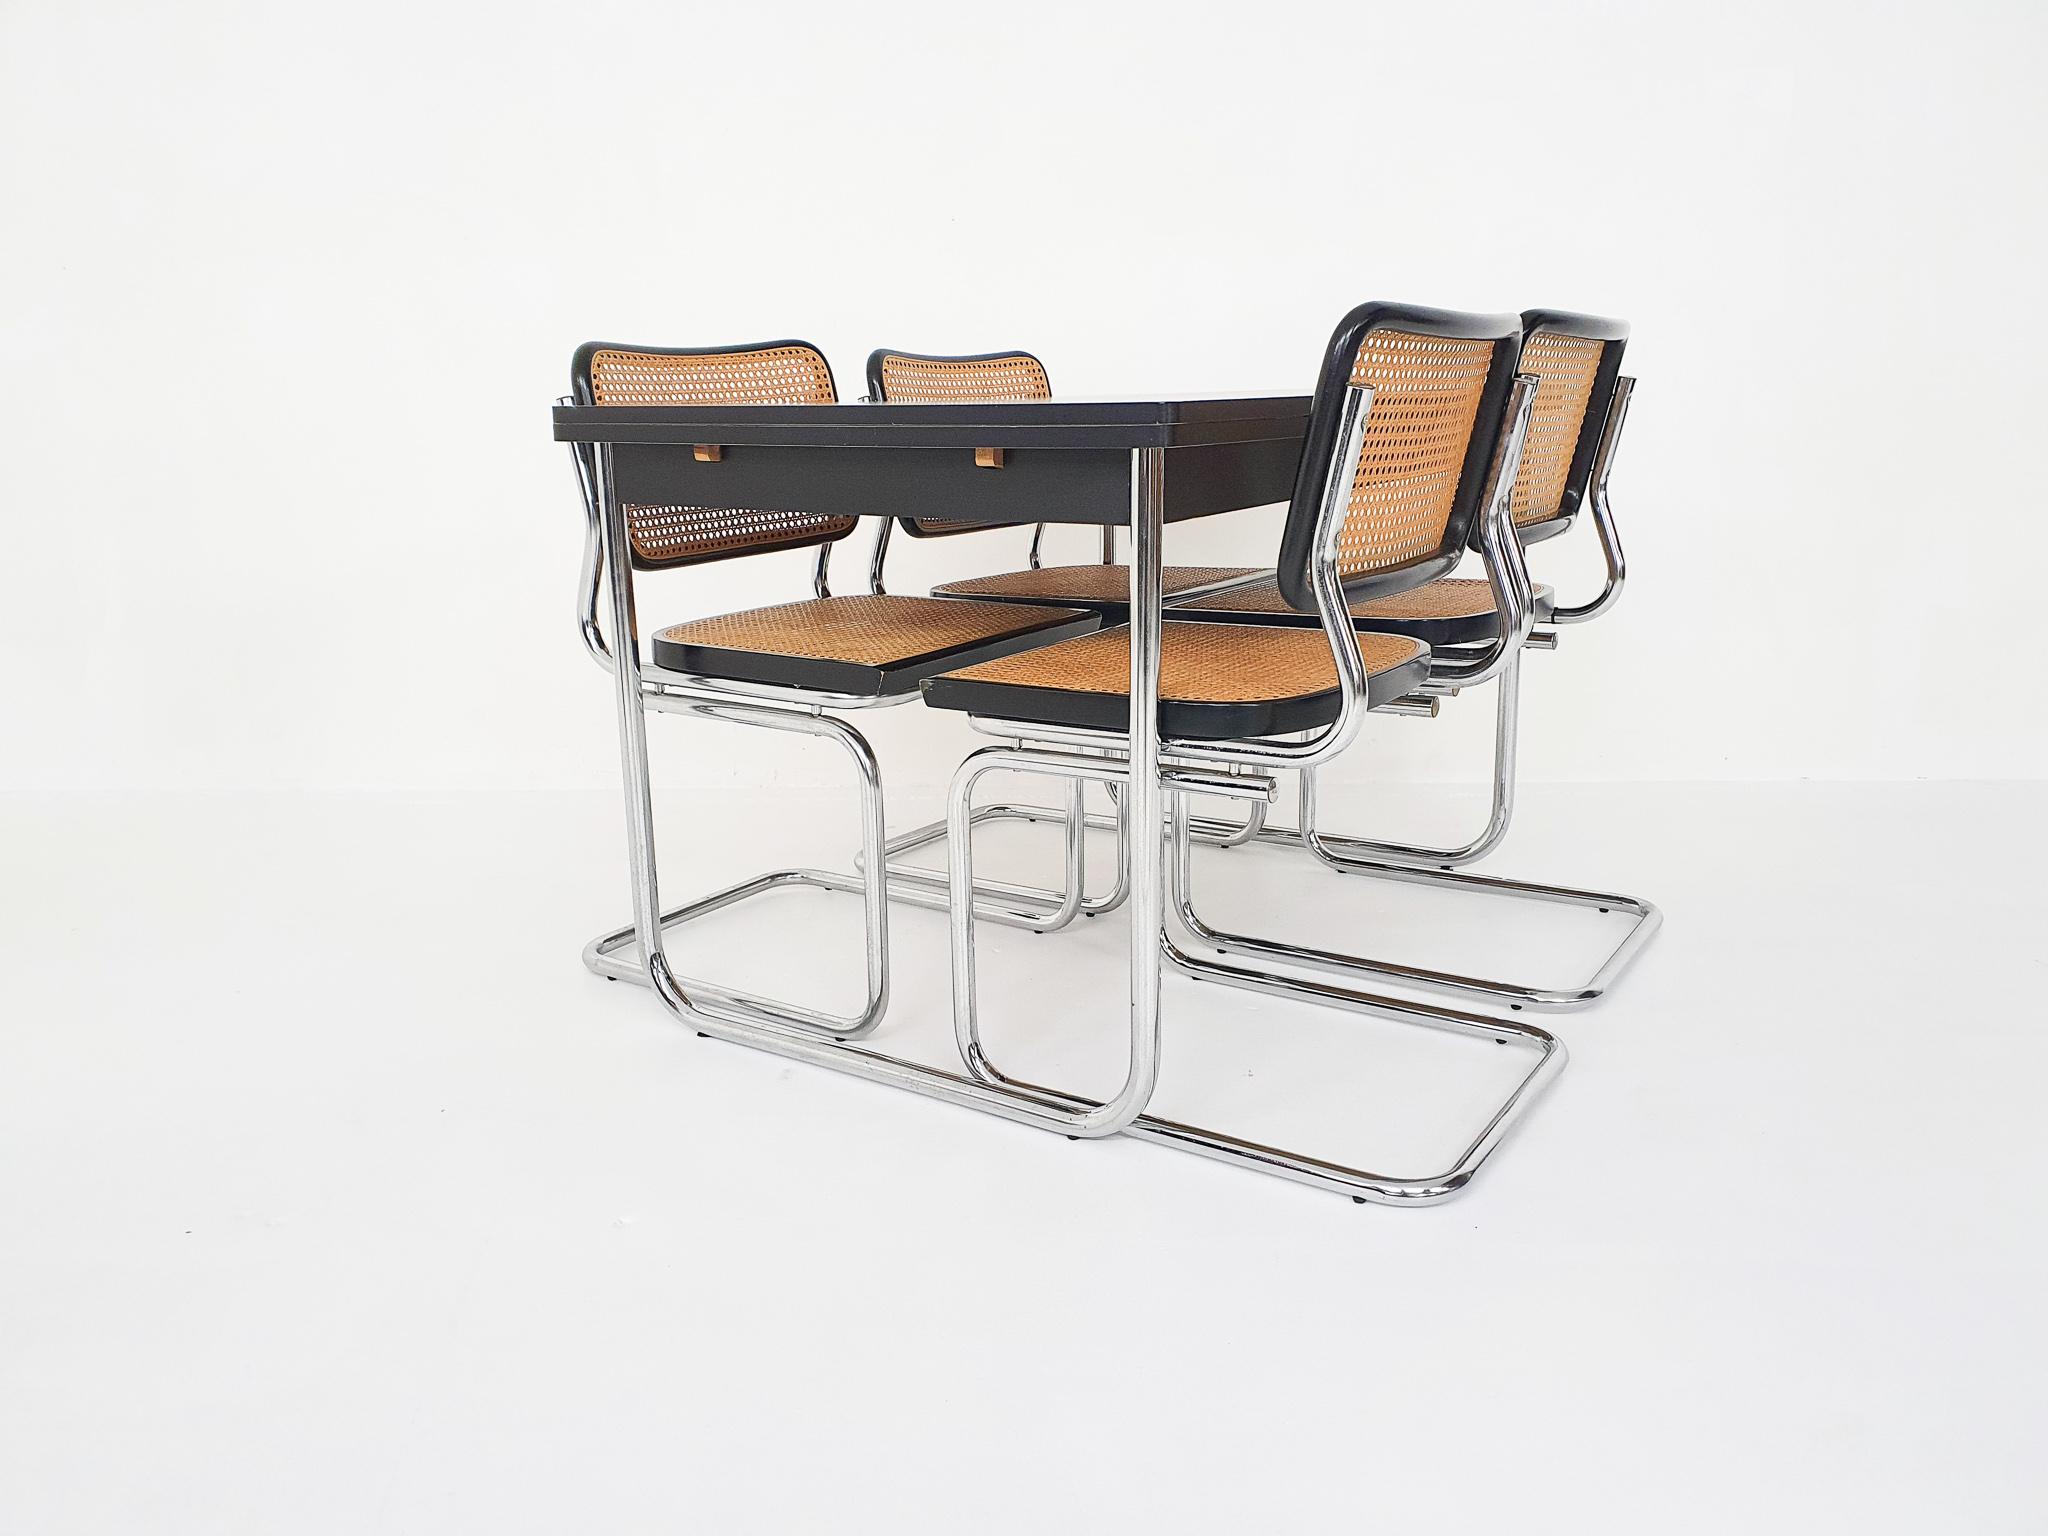 Four tubular chrome dining chairs with webbing seating and back.
The table has chrome feet and black wooden top with two extension leaves. Some small repairs on the side of the table.
Measures: Chairs:
Width: 45 cm
Depth: 50 cm
Height: 82